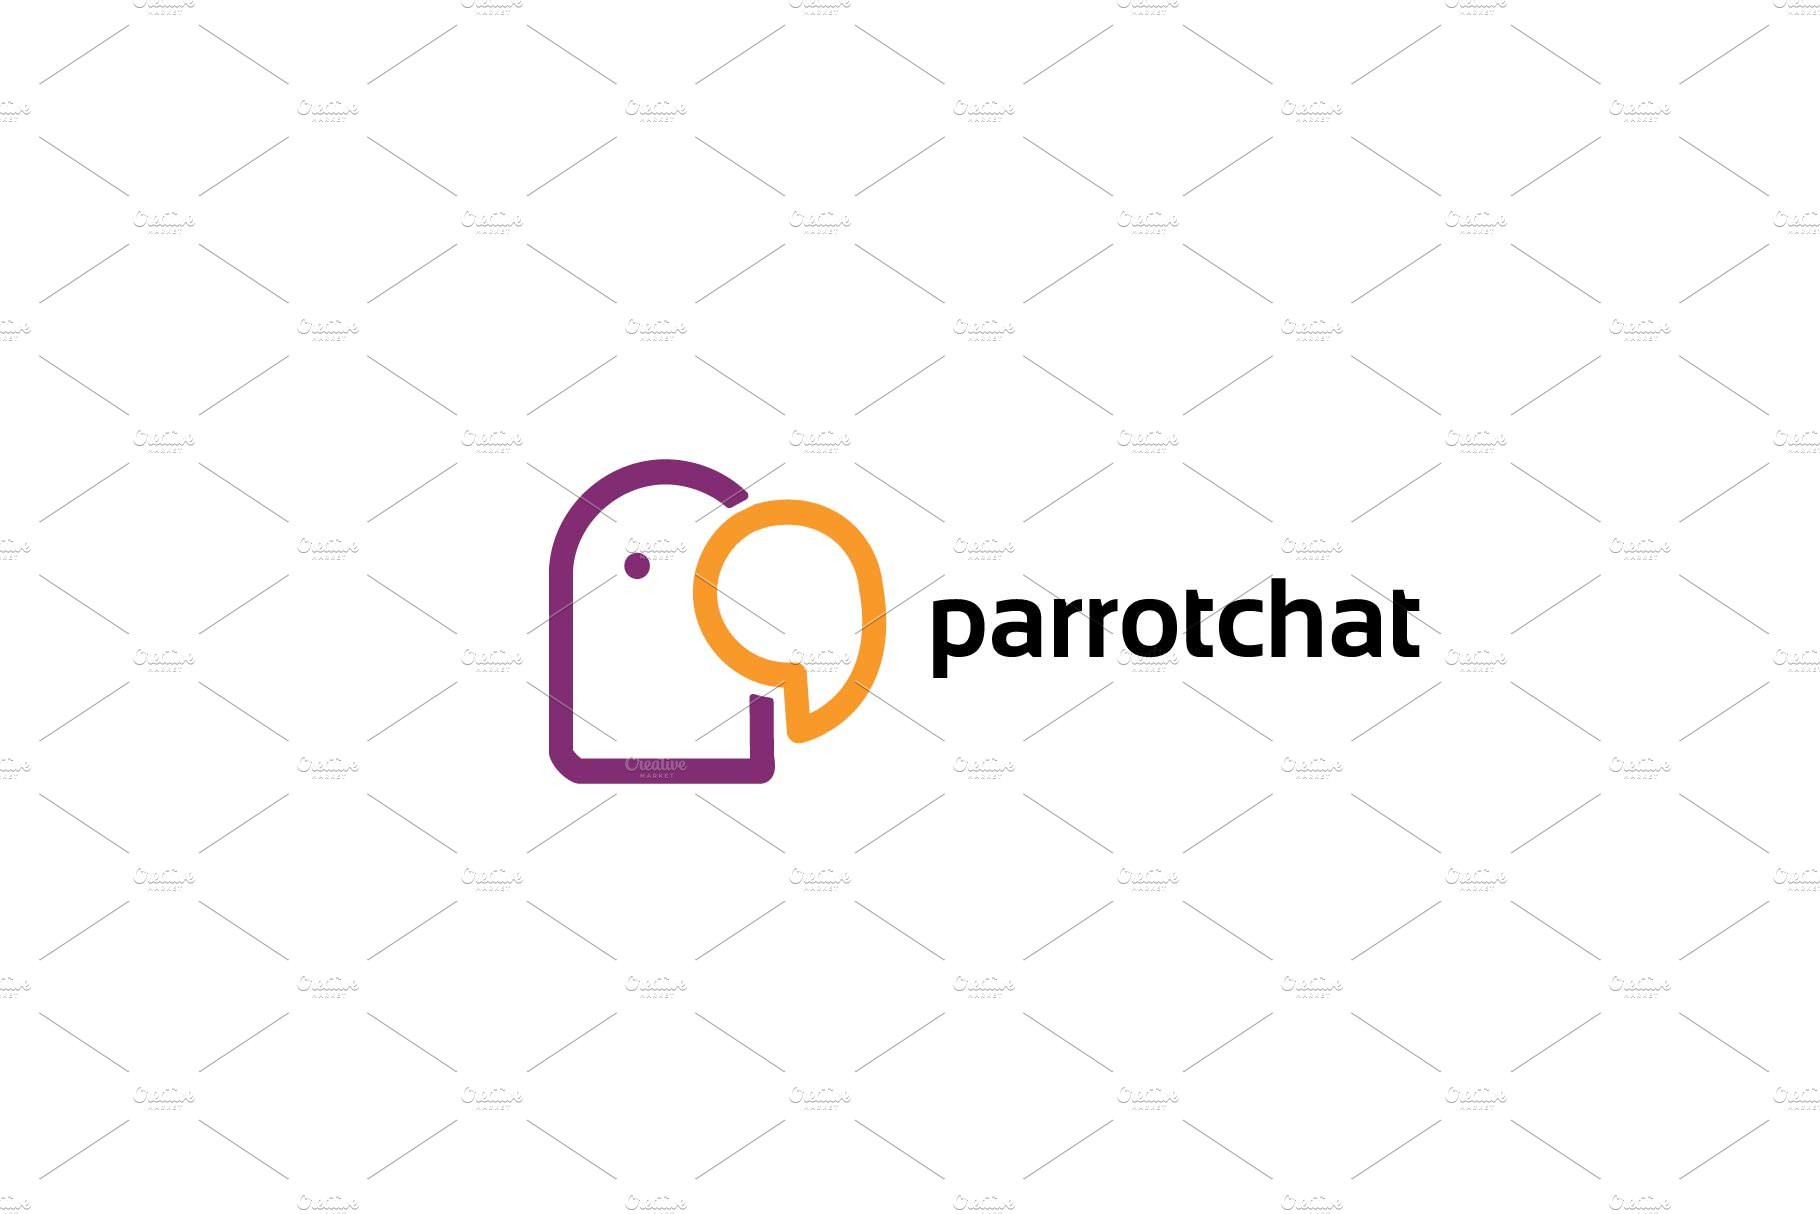 parrot chat logo cover image.